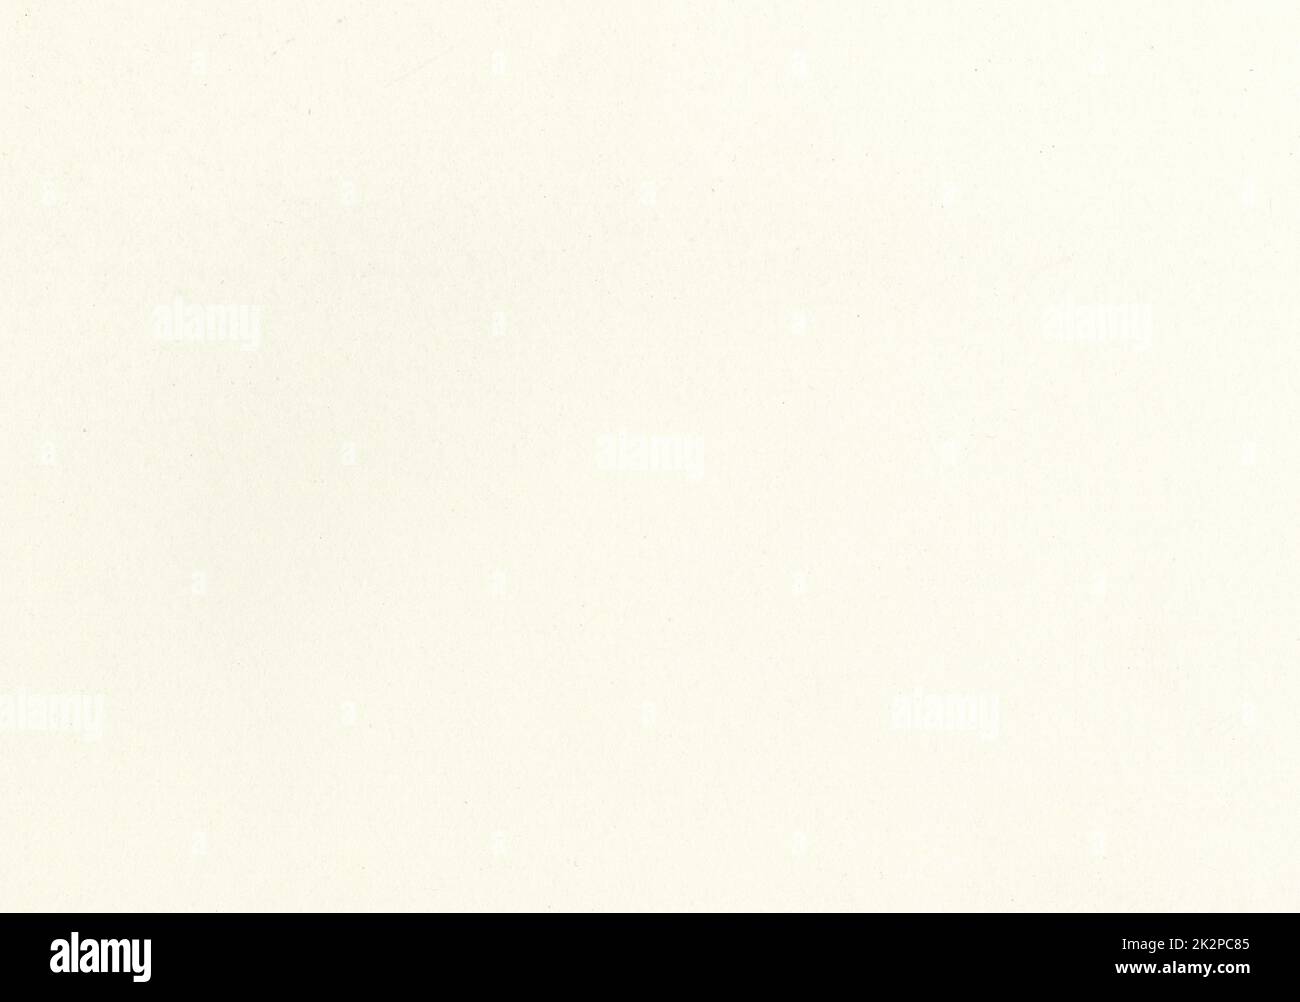 High resolution old light beige paper texture background scan with fine grain fiber and dust particles smooth uncoated aged paper for wallpapers and material mockup Stock Photo